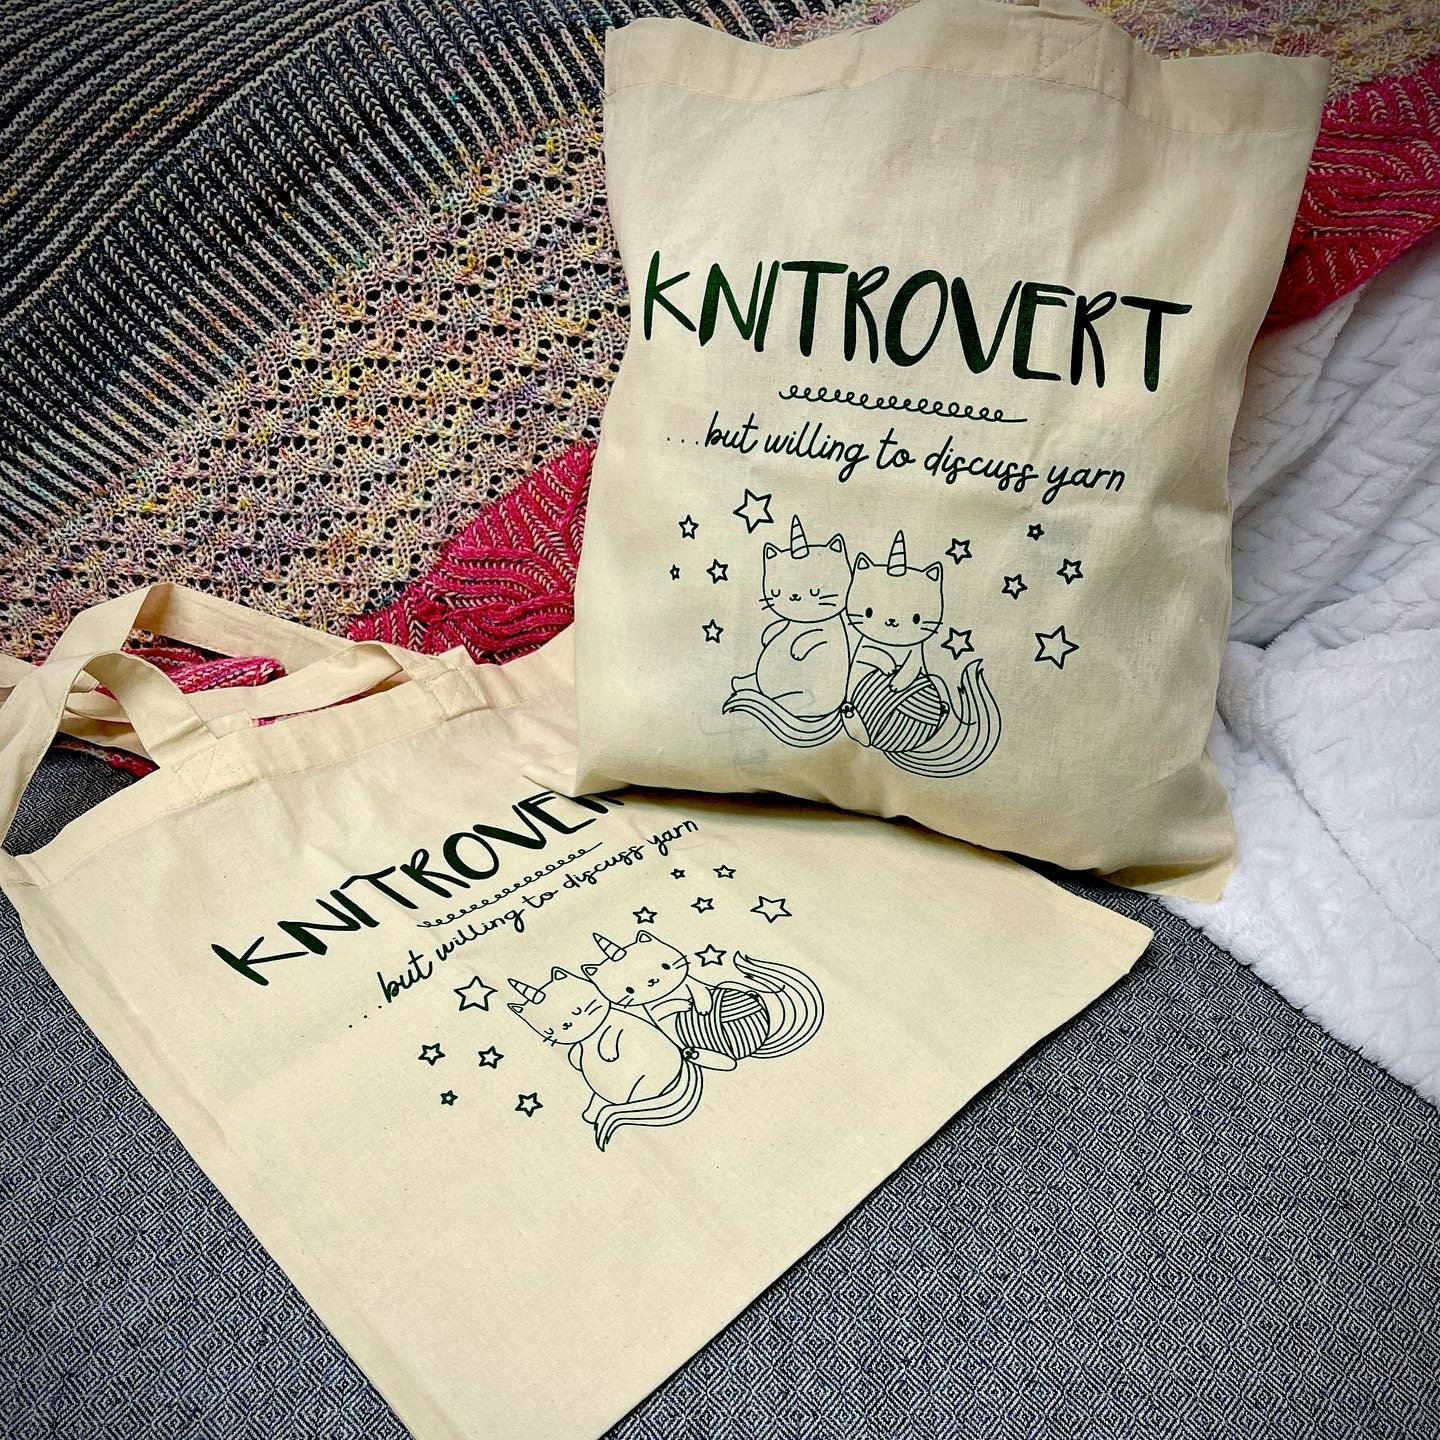 Good news!! These Knitrovert cotton tote bags are now available in the shop. 

Soooo many people had asked if I would make them available, so I’m excited to say you can now grab one hike supplies last 😁

#hypnoticyarn #knitrovert #knittingaccessories #knittingbags #totebag #knitlife #knitobsessed #yarnobsessed #yarnstagram #knitstagram #yarnislife #yarnhoarder #introvertproblems